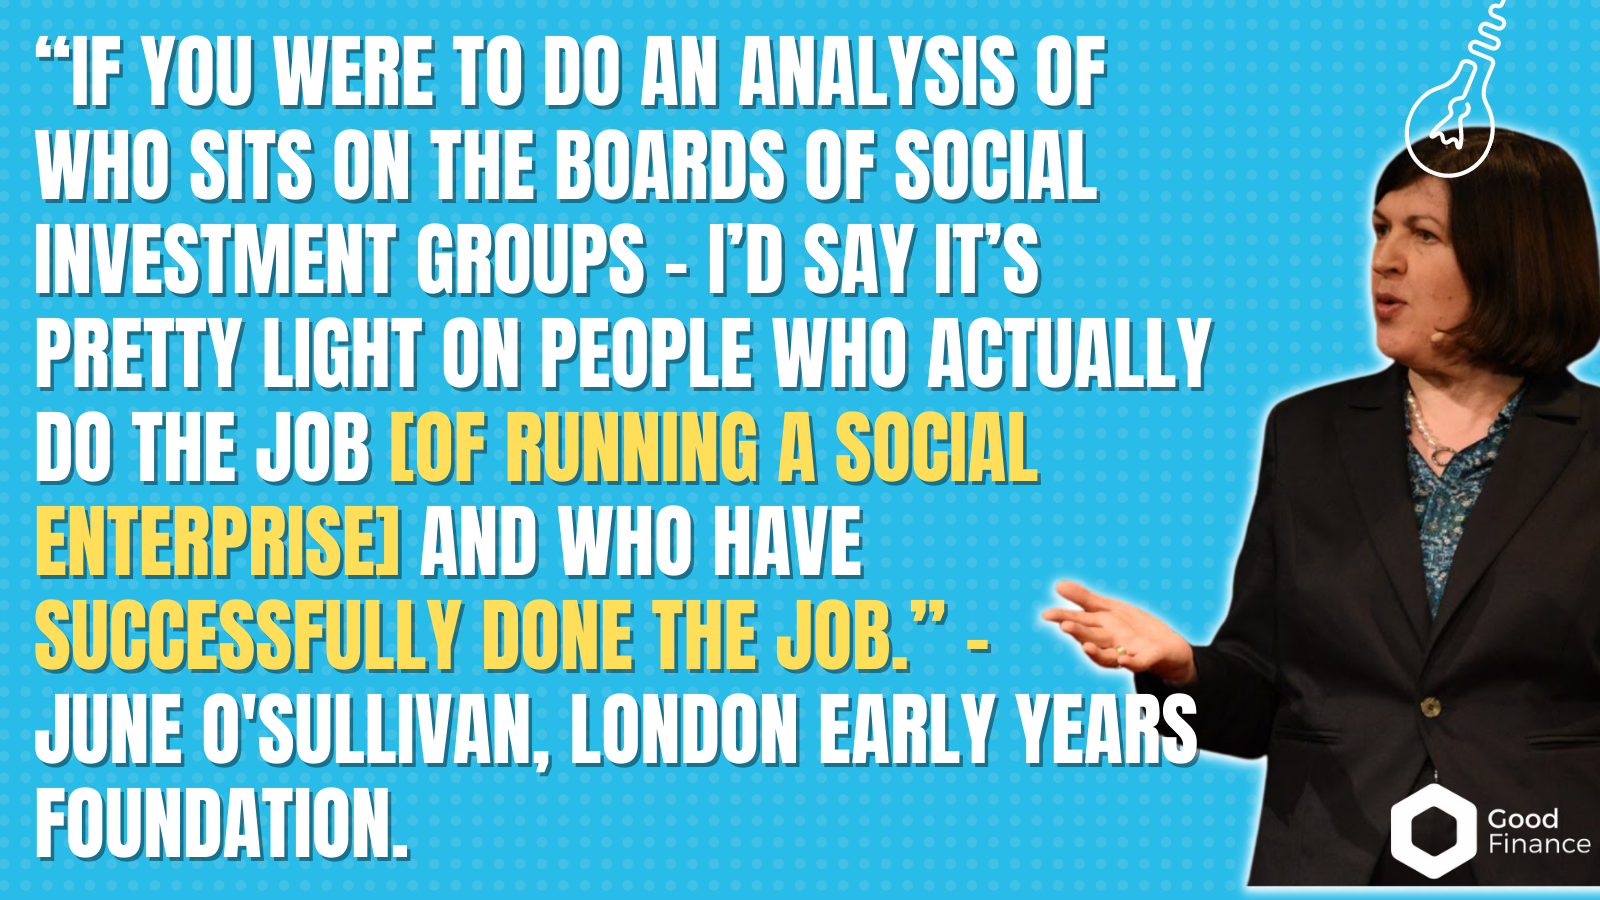 “If you were to do an analysis of who sits on the boards of social investment groups - I’d say it’s pretty light on people who actually do the job [of running a social enterprise] and who have successfully done the job.” -  June O'Sullivan, London early years foundation.